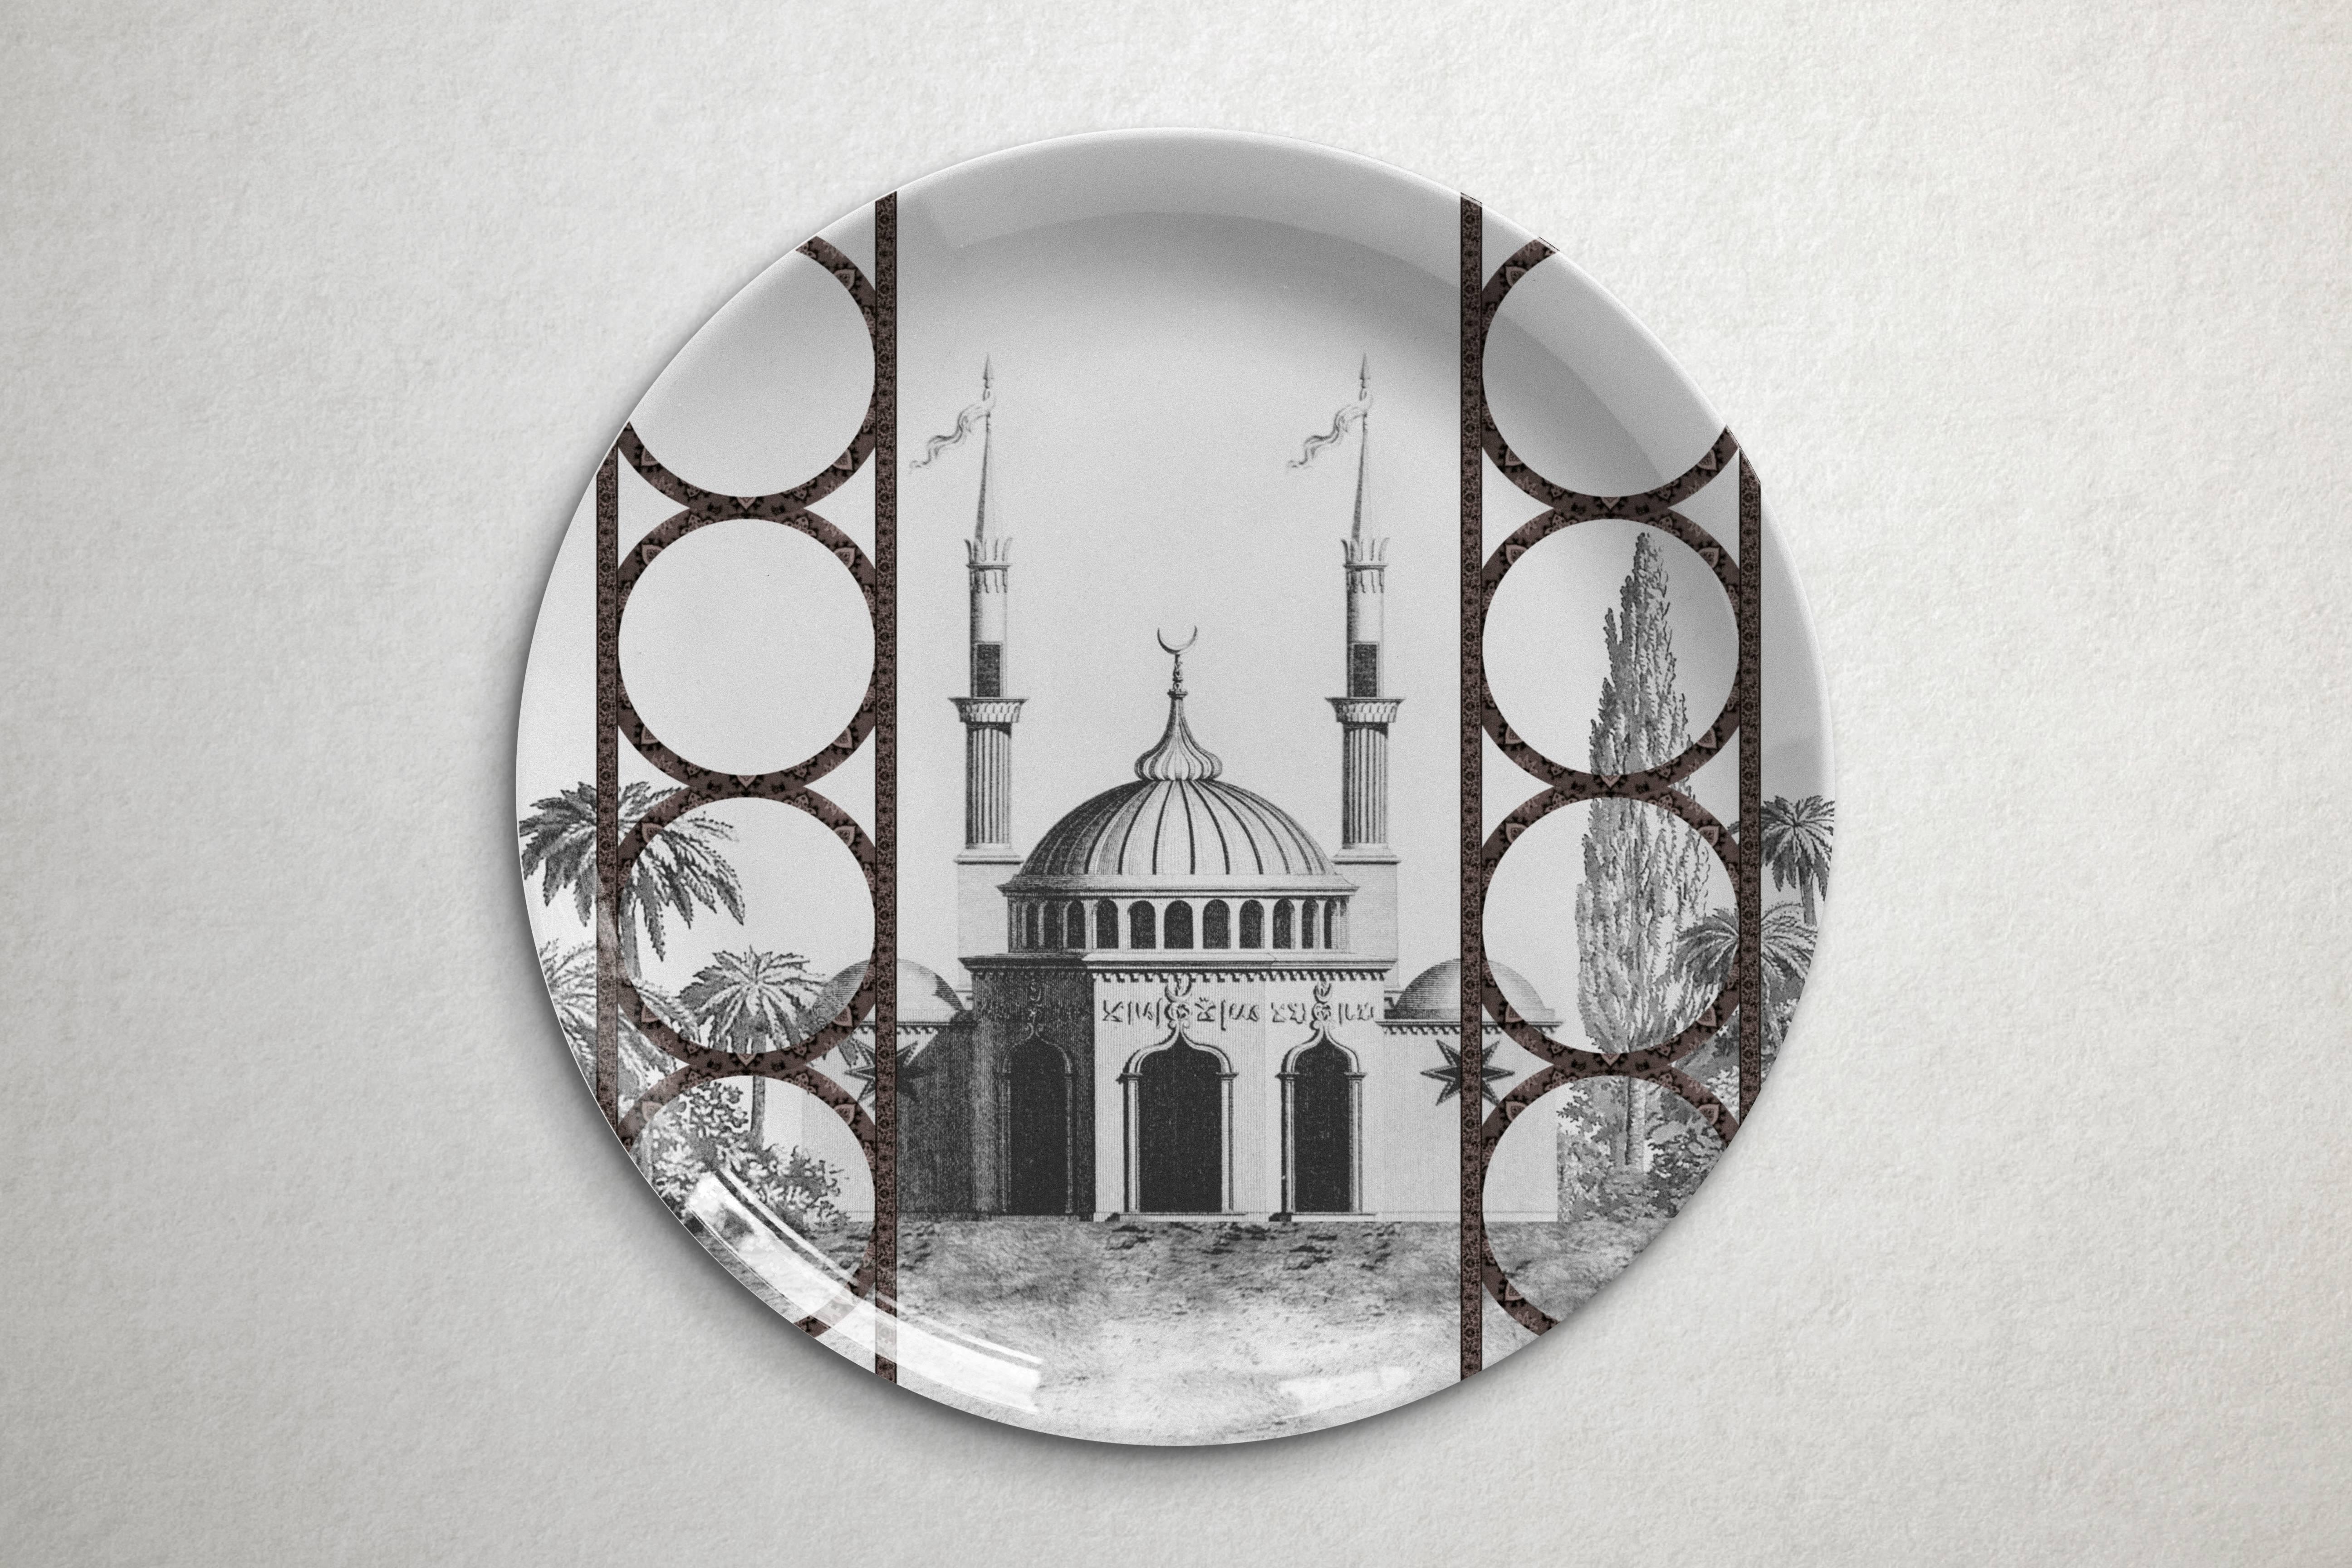 Beautiful Toptaki black porcelain dinner plate by Vito Nesta for Les Ottomans will make an elegant statement with sophisticated Art de la table for every occasion

Handmade in Italy

Upon request available in a set of three or six plates.